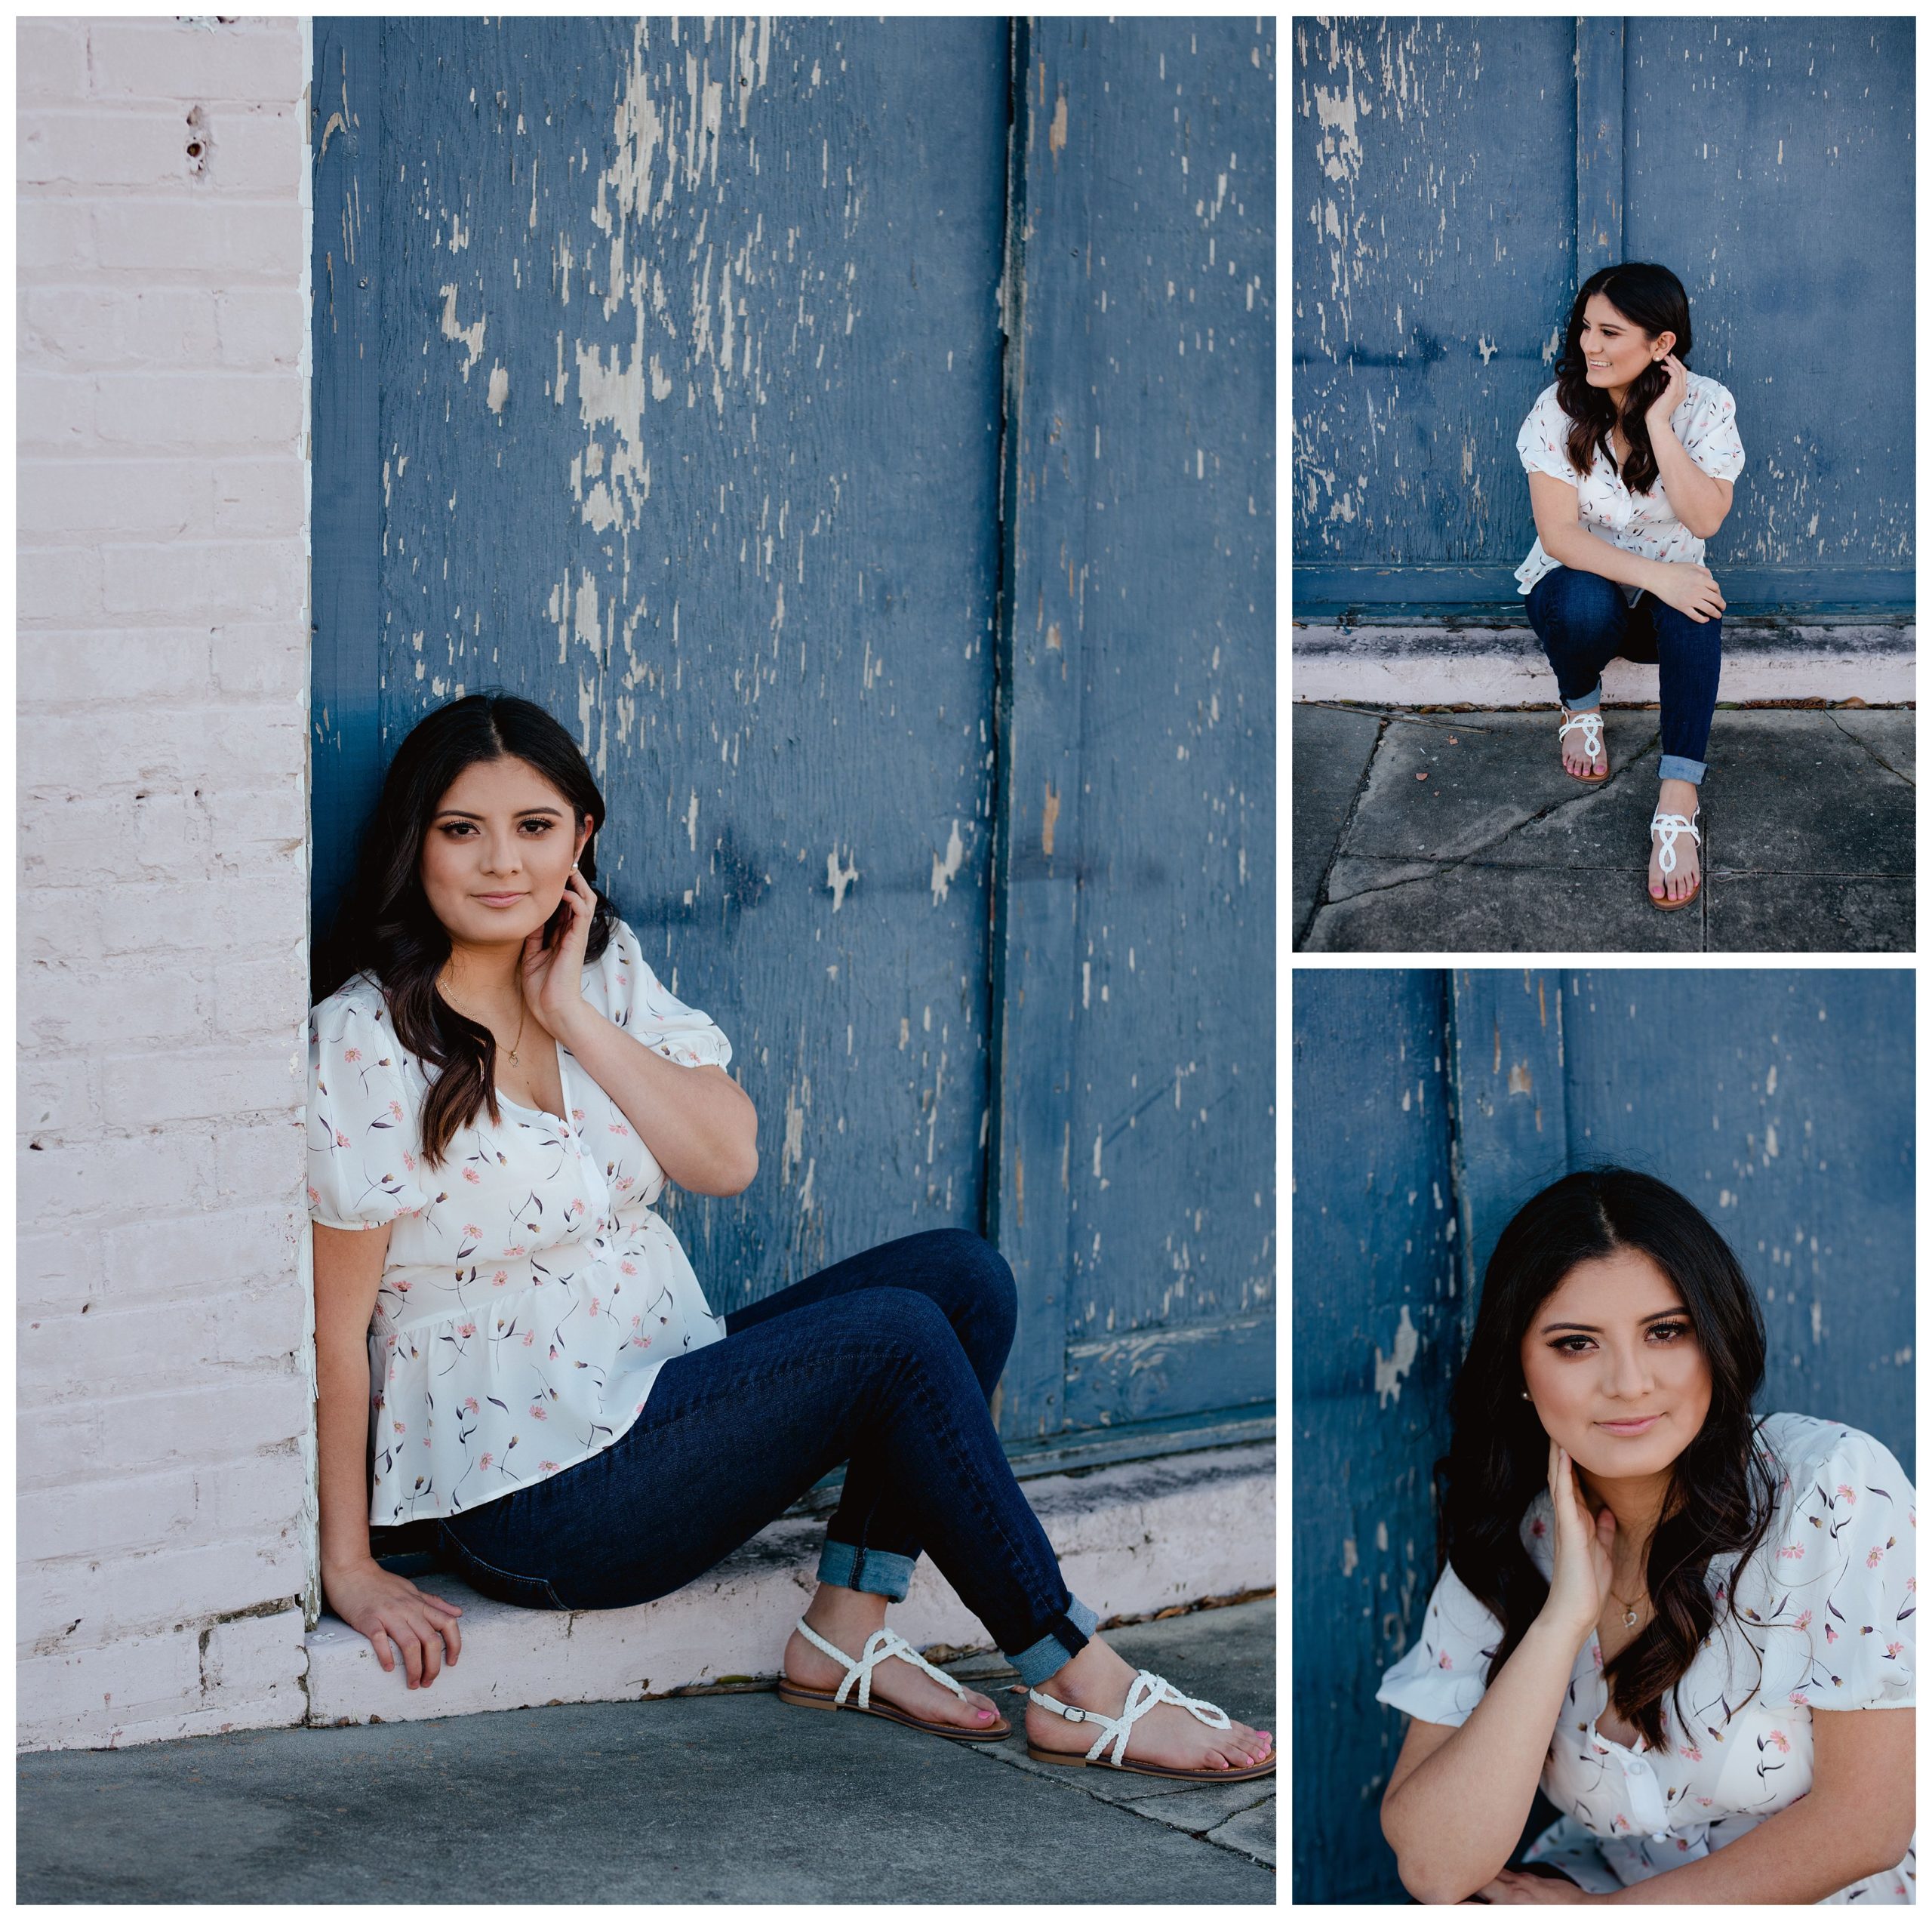 Rustic buildings in senior pictures are the perfect contrast!